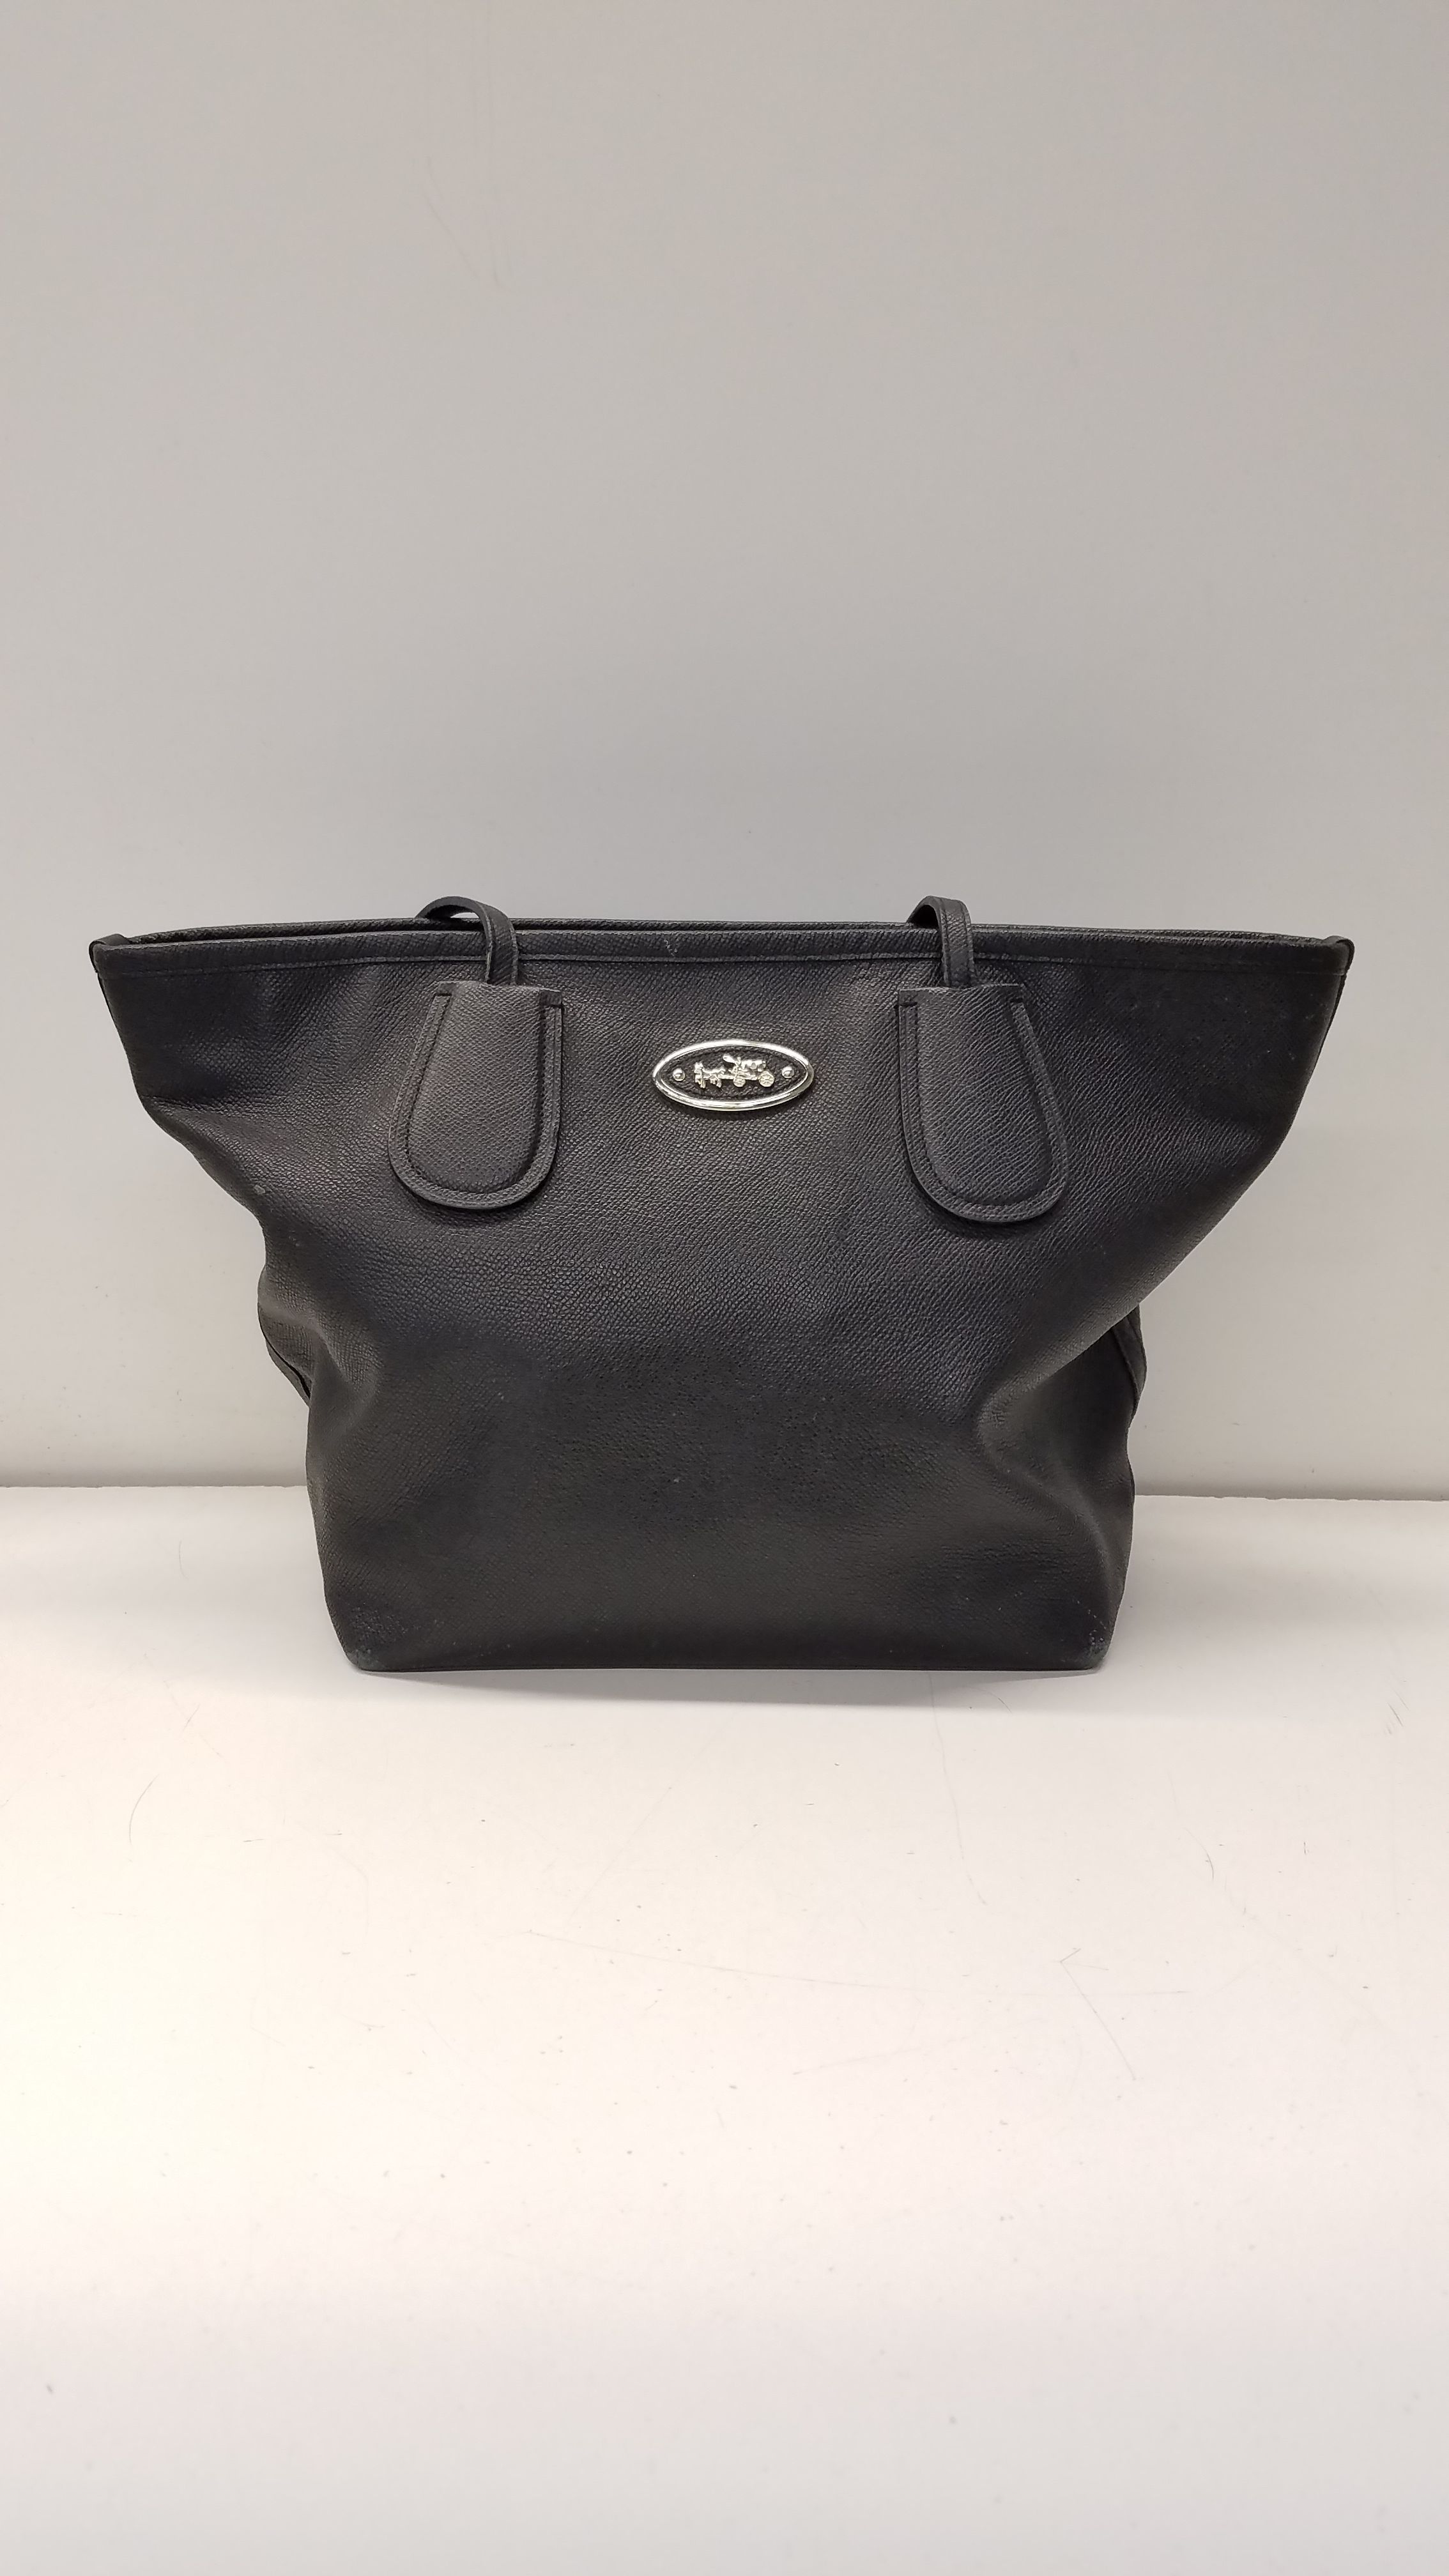 Buy the Coach Leather Pebbled Tote Bag Black-SOLD AS IS, DAMAGED ...